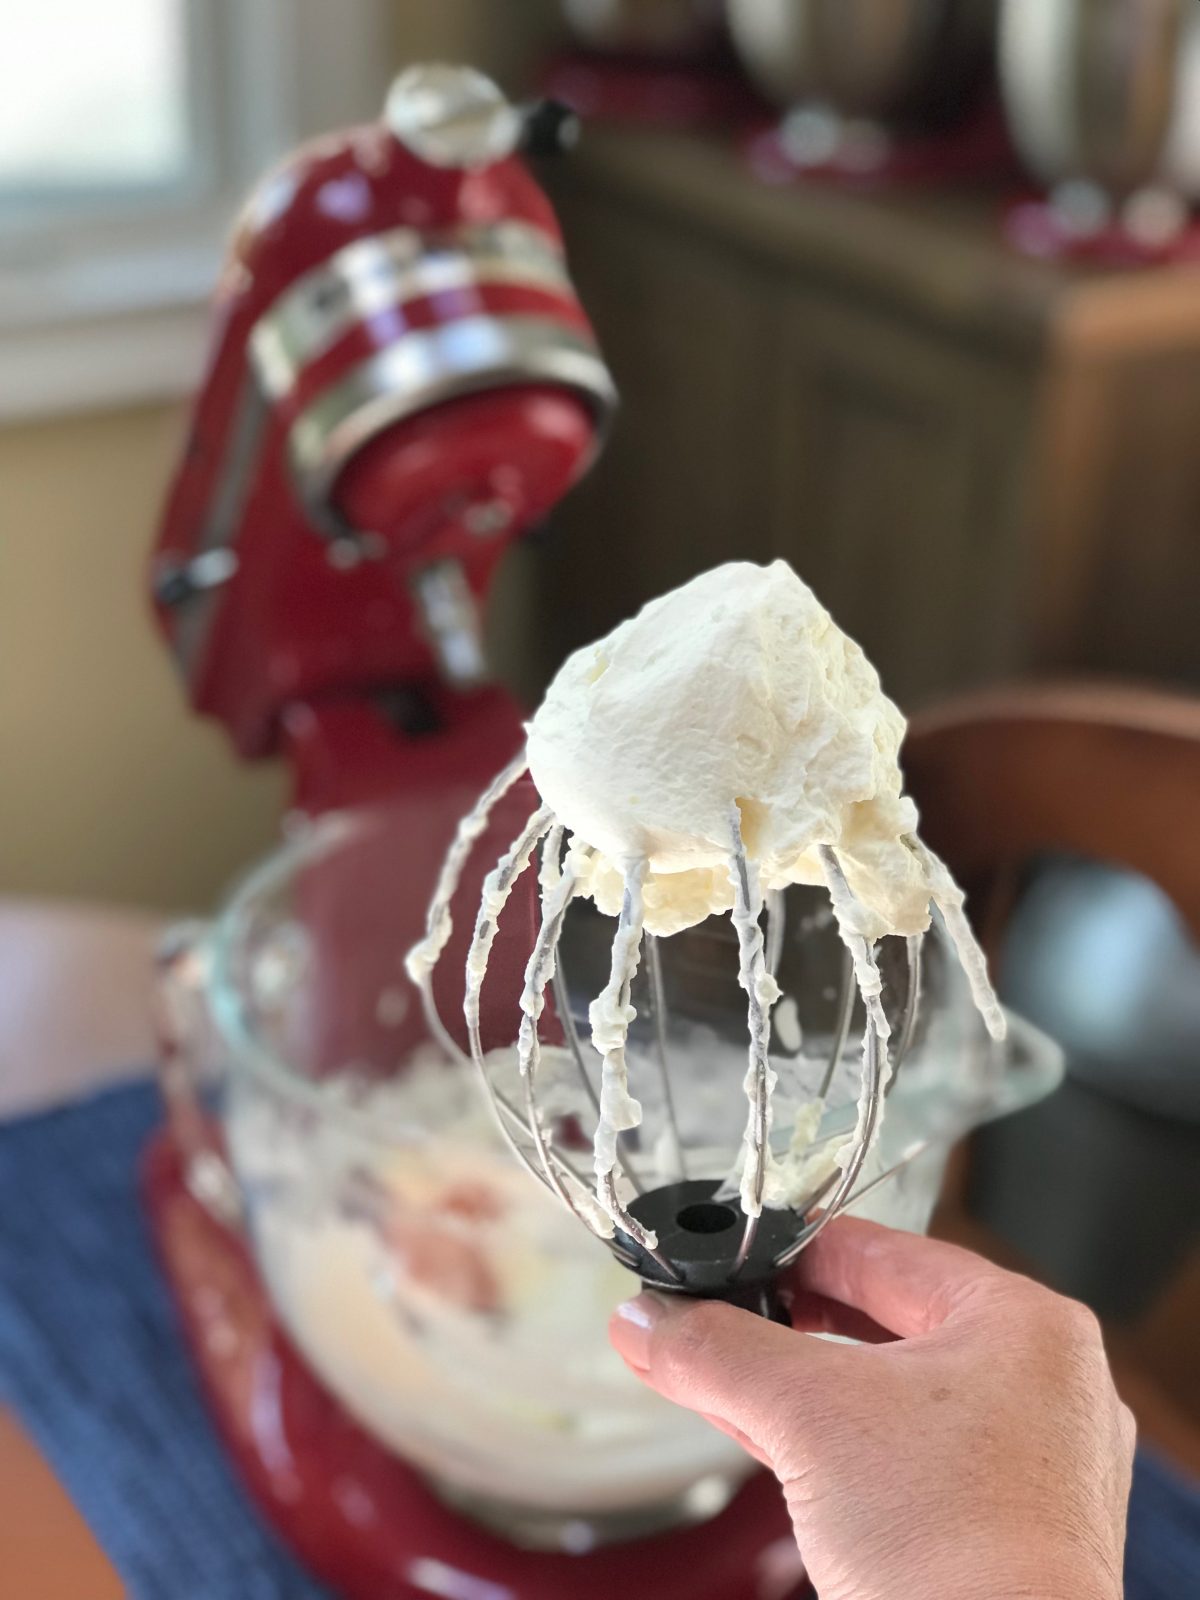 https://www.epicuricloud.com/wp-content/uploads/2019/08/Stabilized-Whipped-Cream-1200x1600.jpg